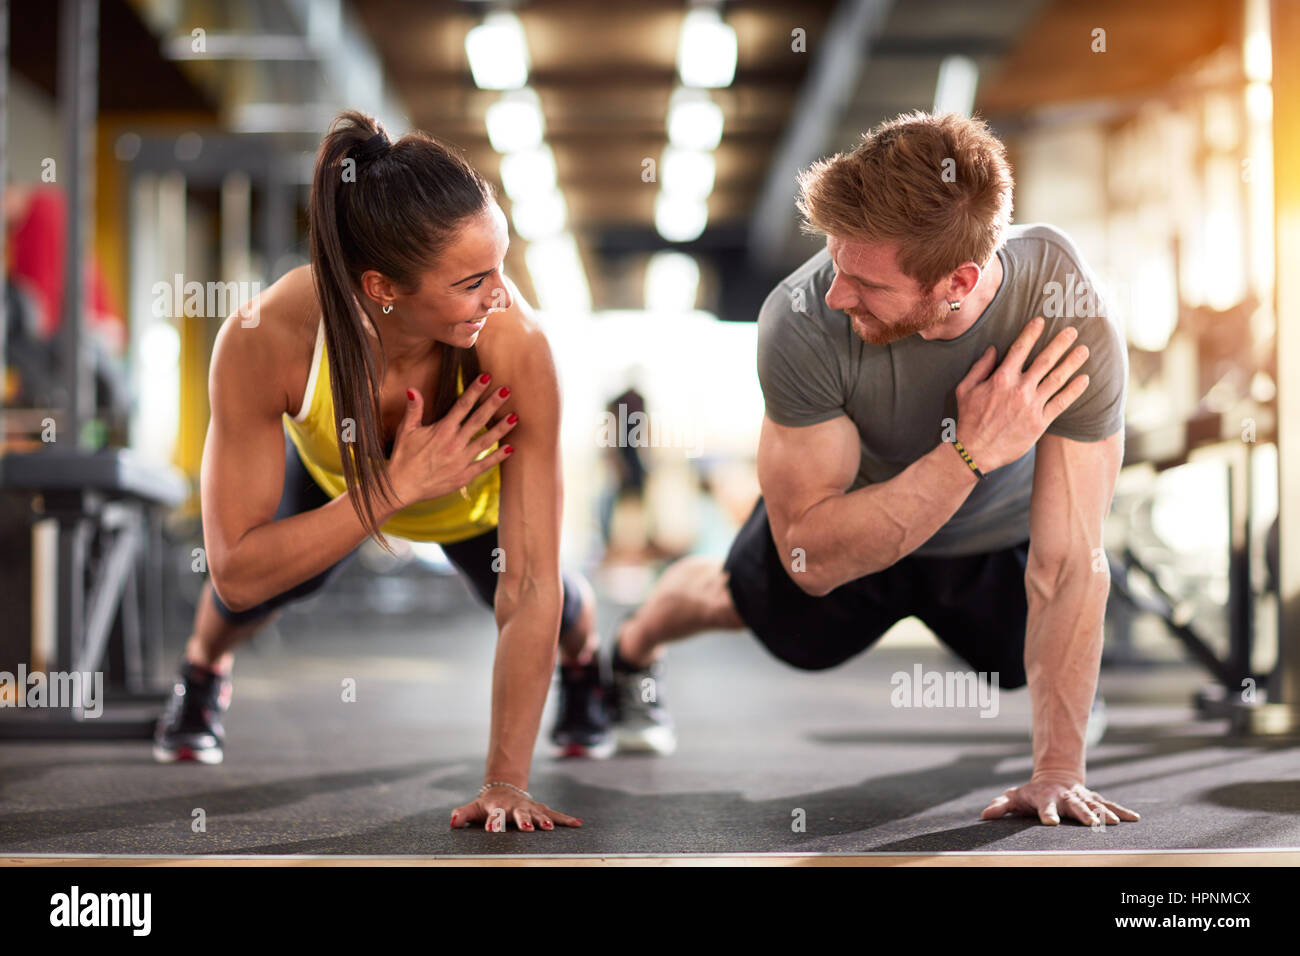 Man and woman strengthen hands at fitness training Stock Photo